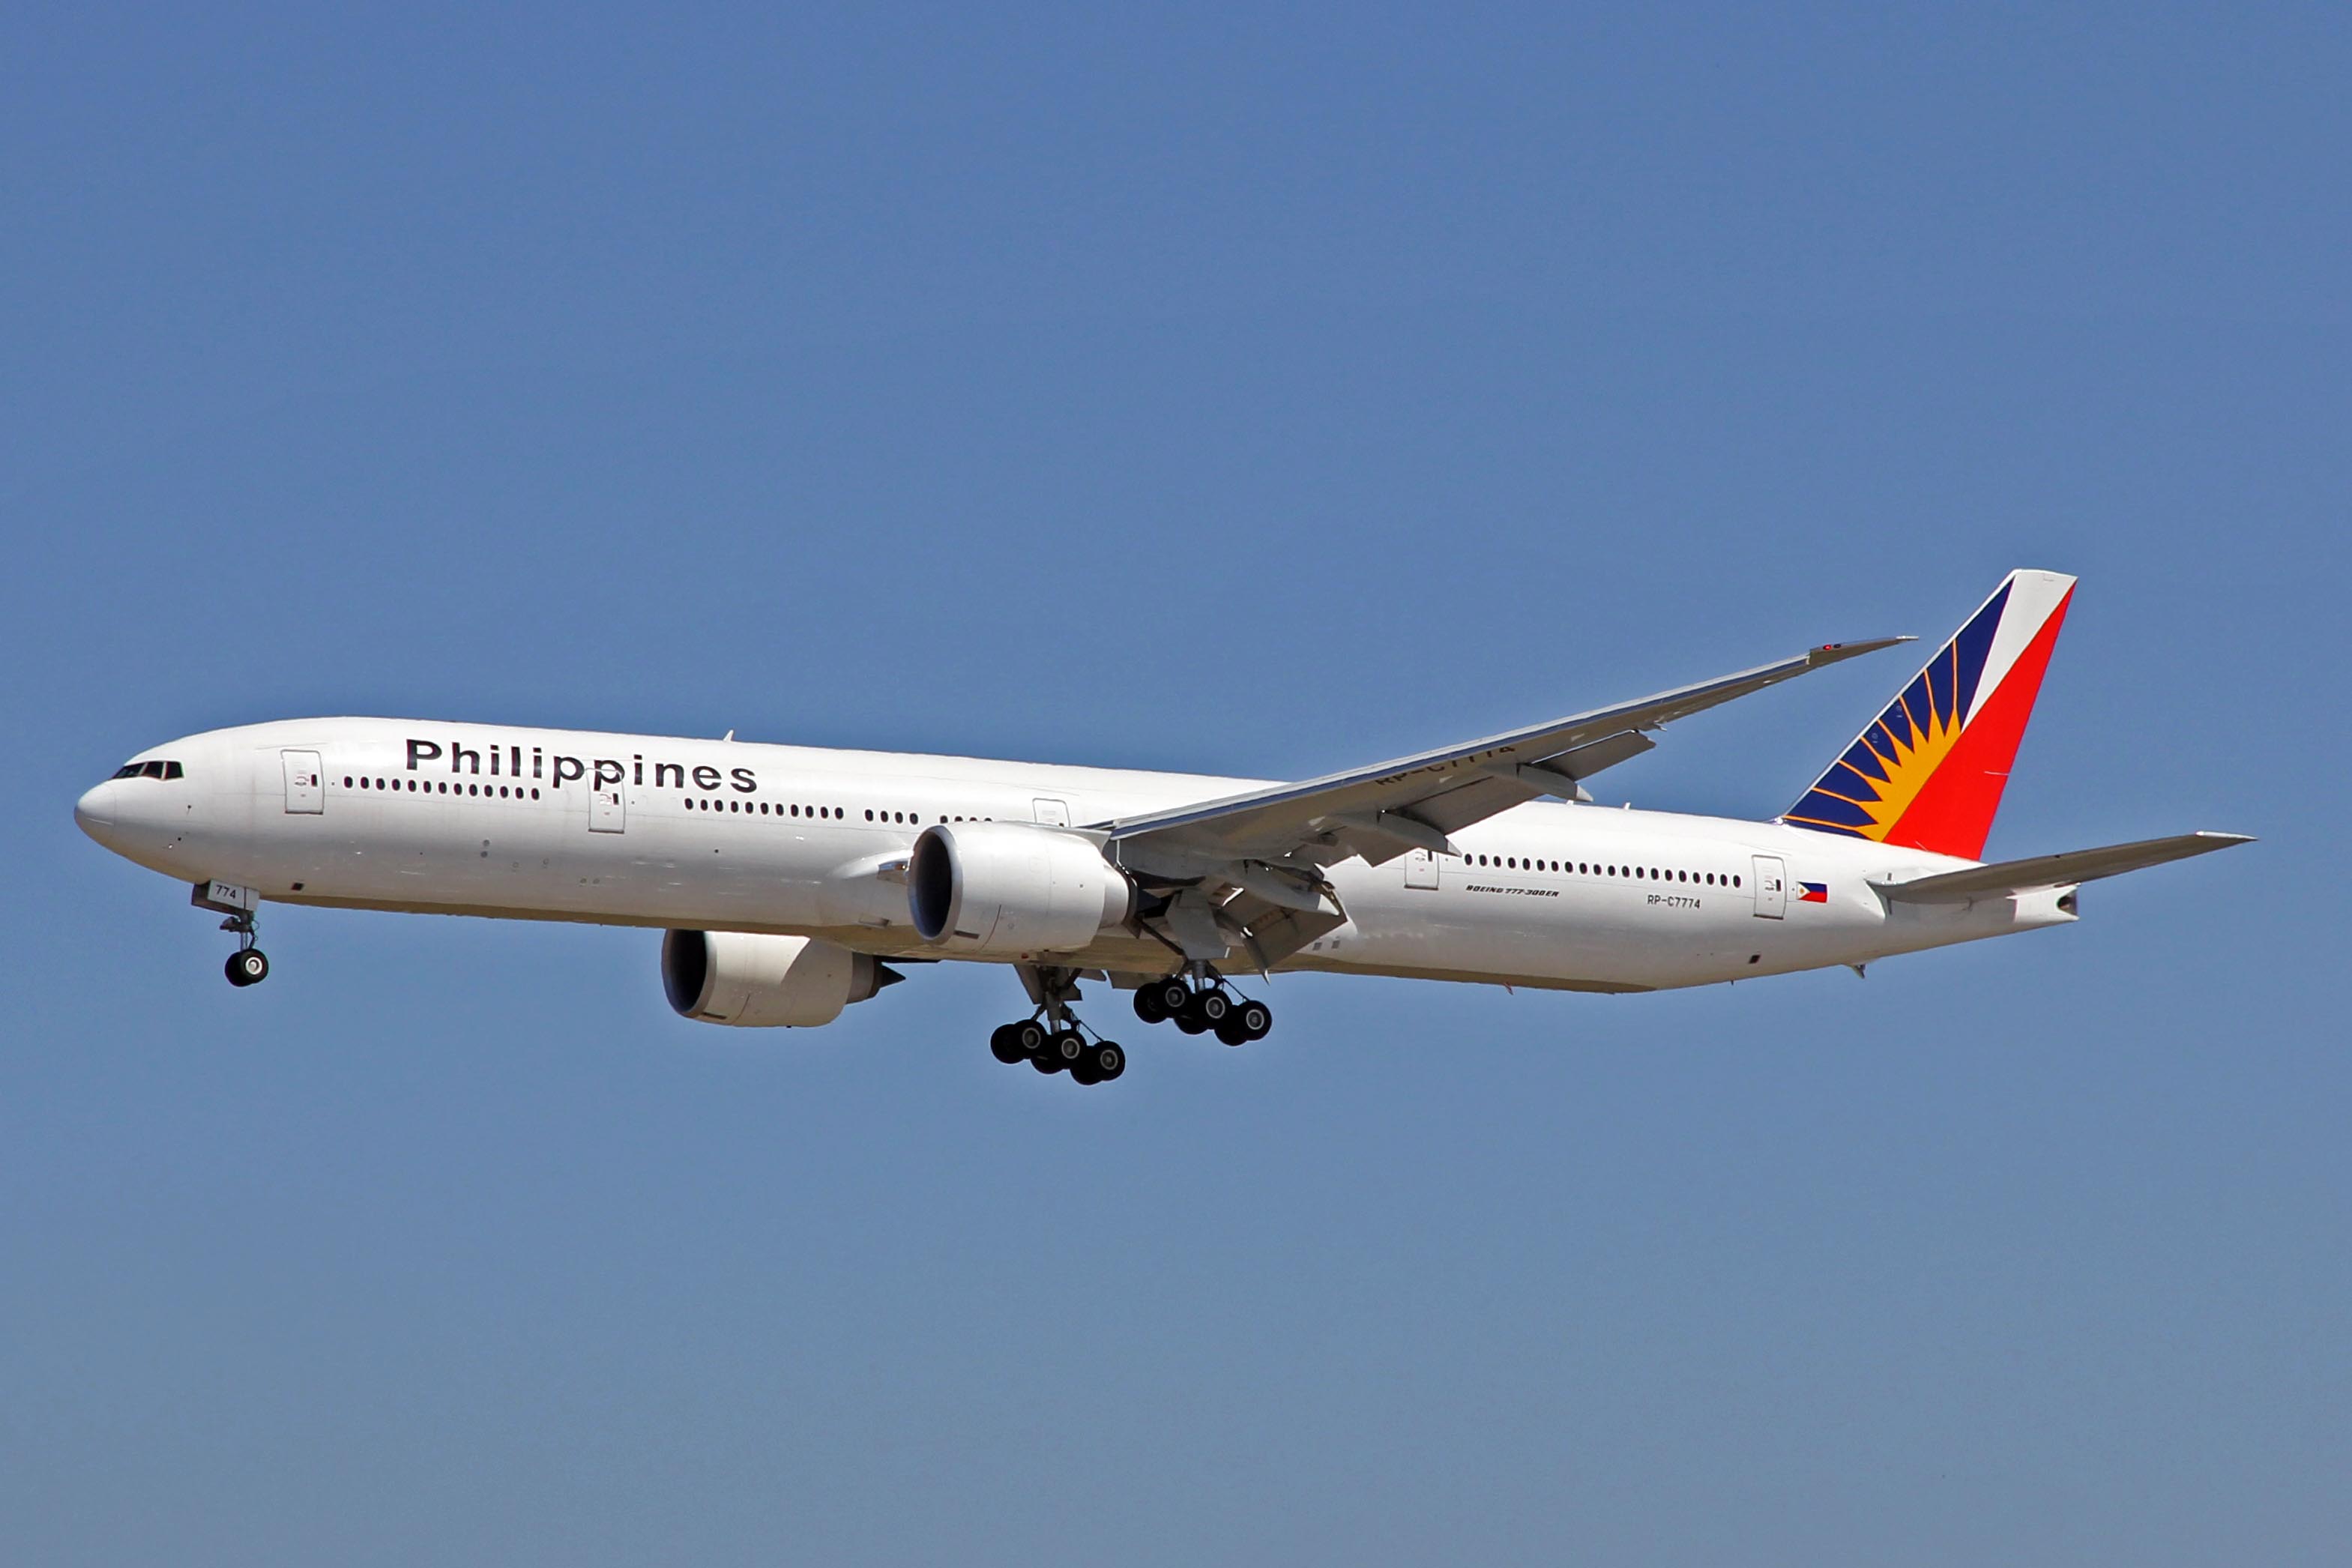 List Of Airlines The Philippines, Front Desk Table Philippines Airlines